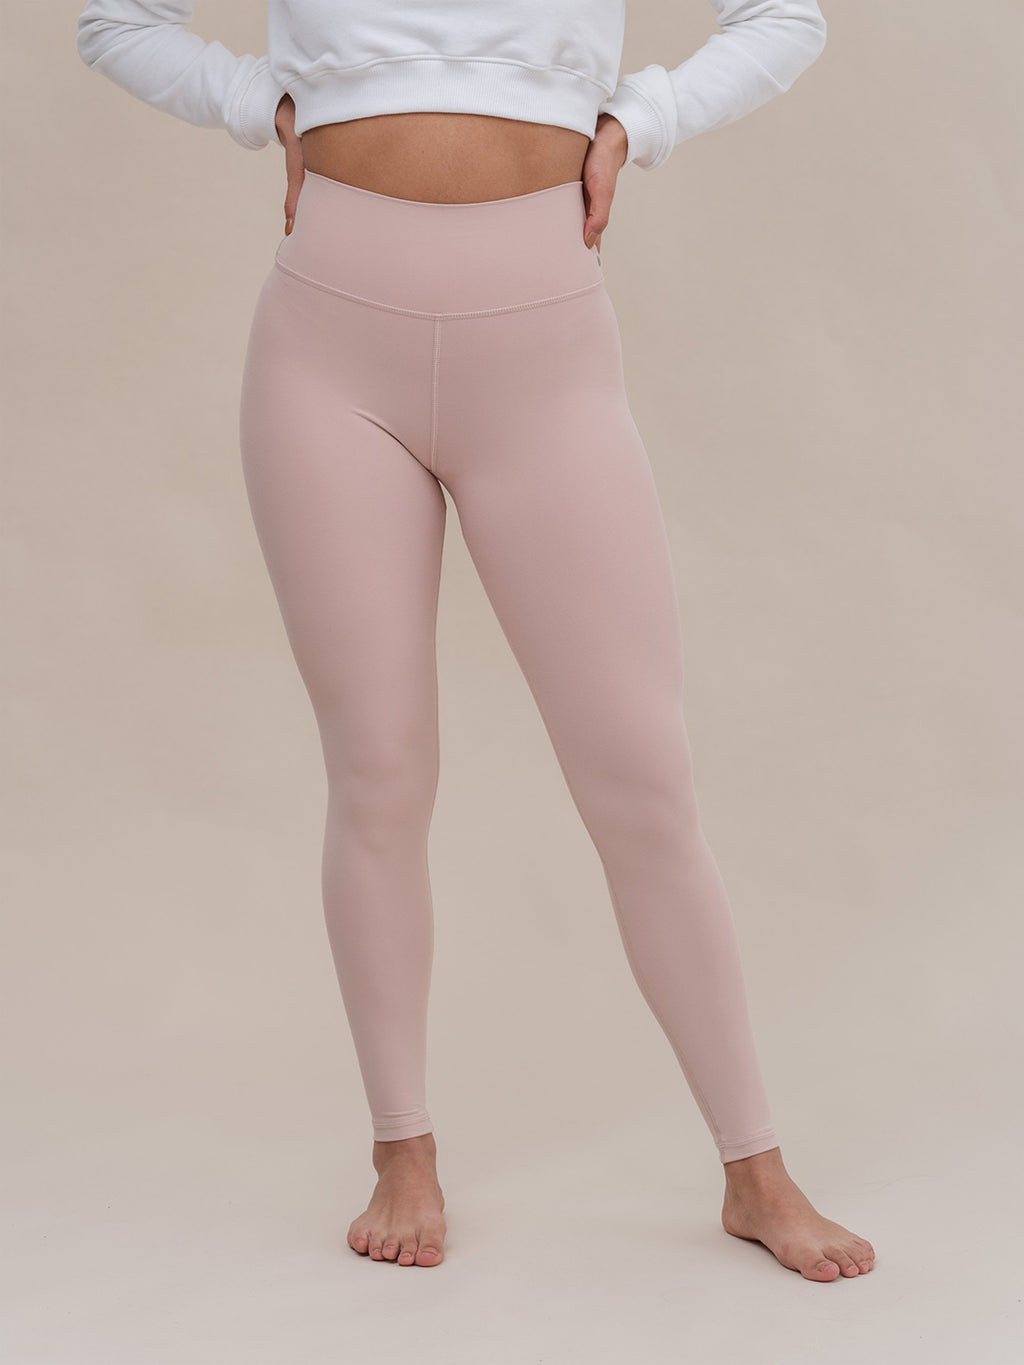 Althea Tights Dusty Pink - Ryvelle®